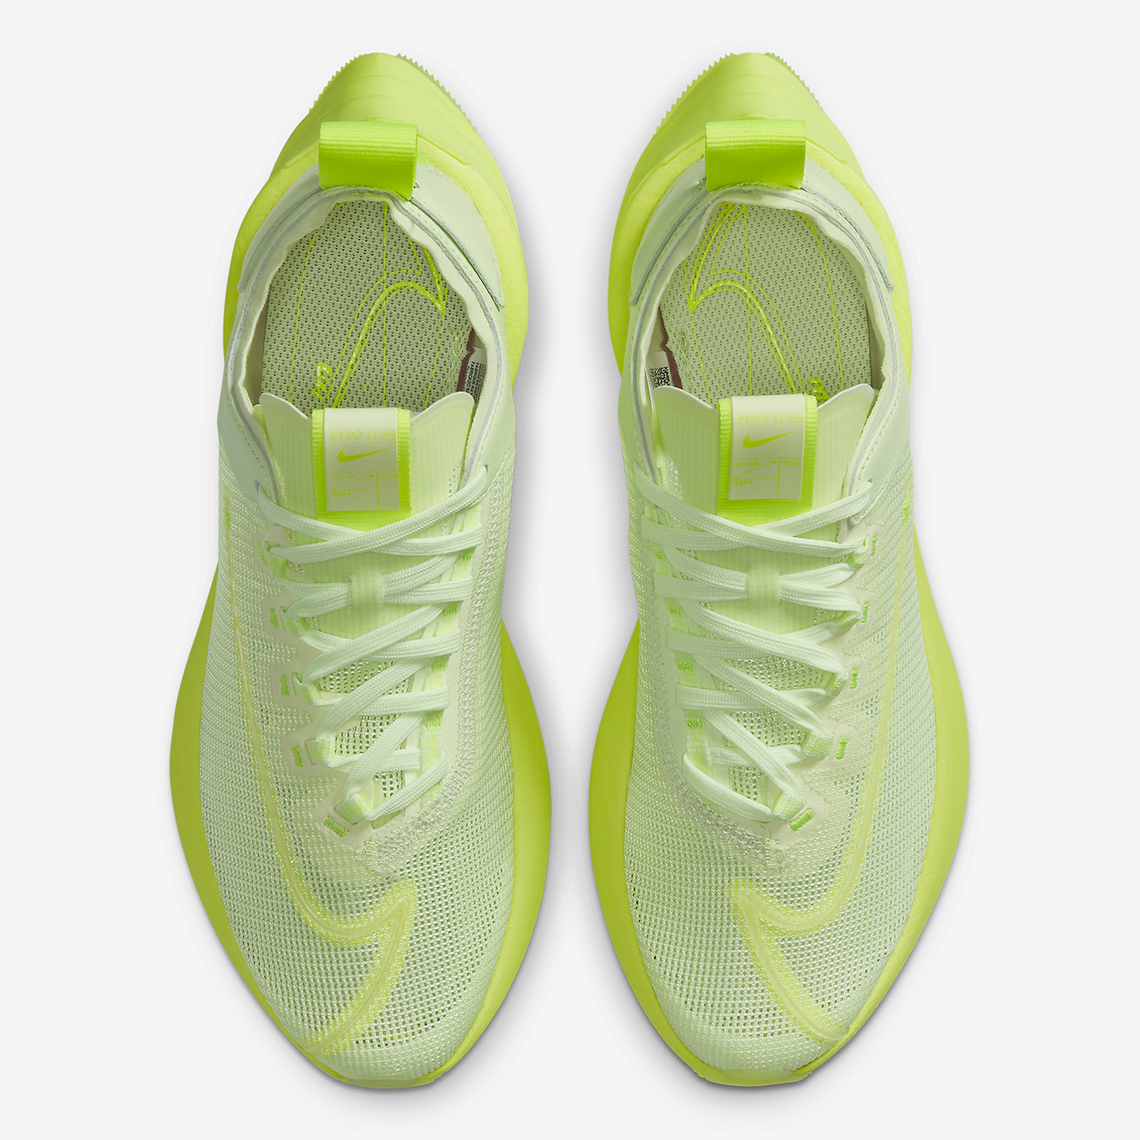 Nike Zoom Double Stacked Volt Ci0804 700 1